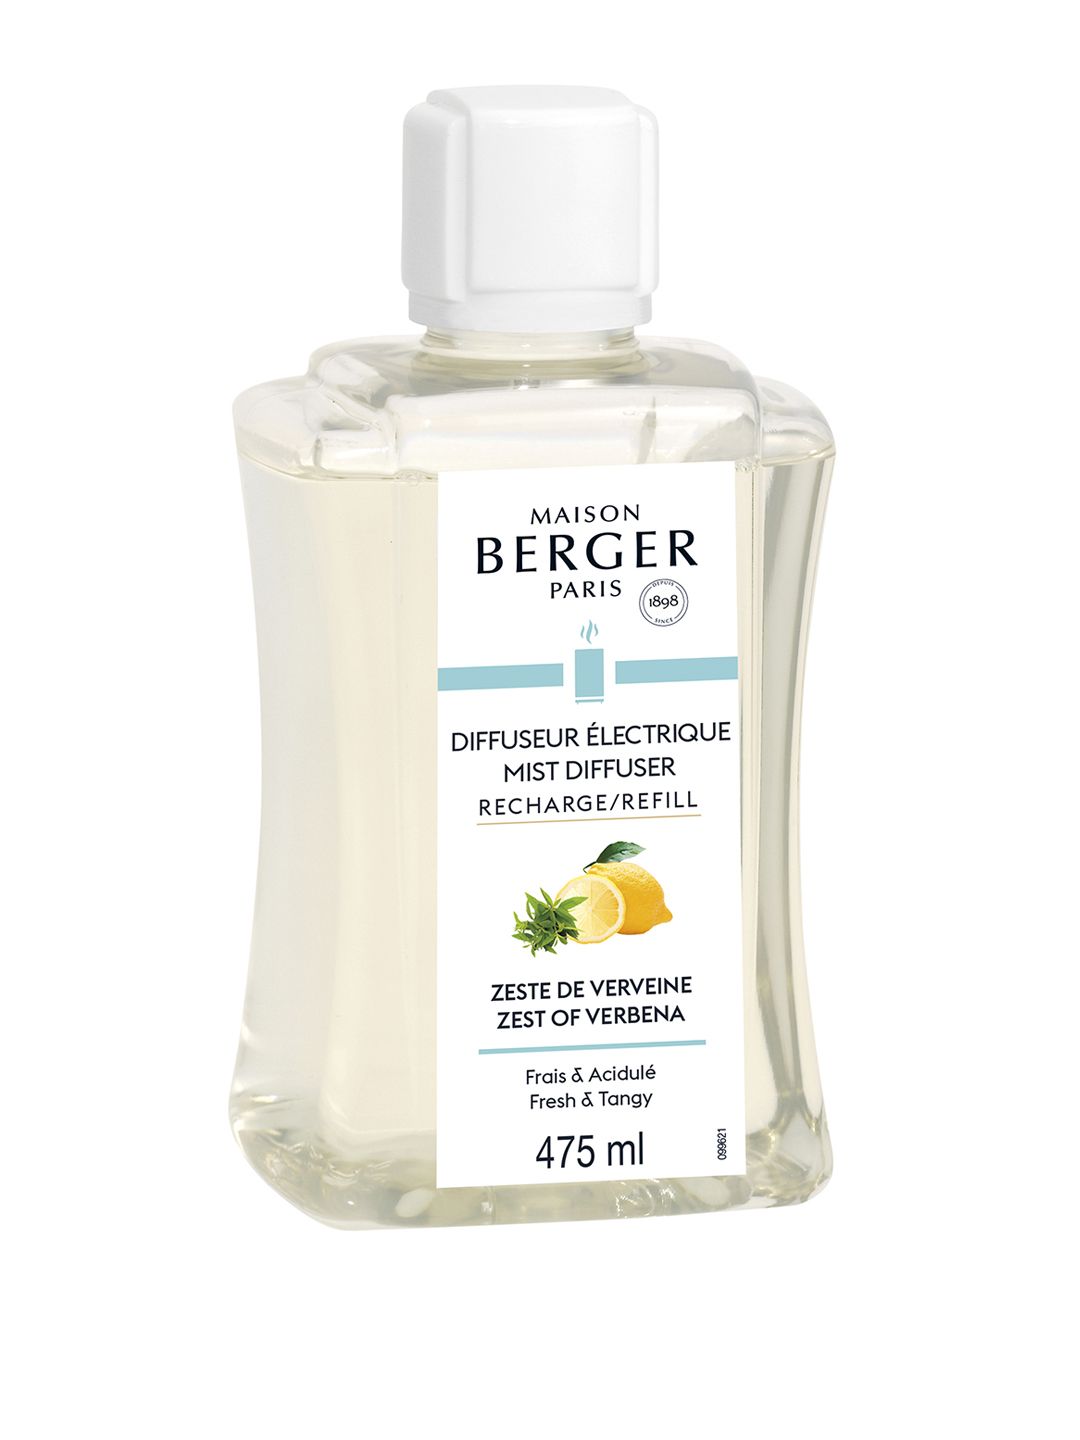 MAISON BERGER Zest of Verbena Diffuser Refill 475ml Price in India